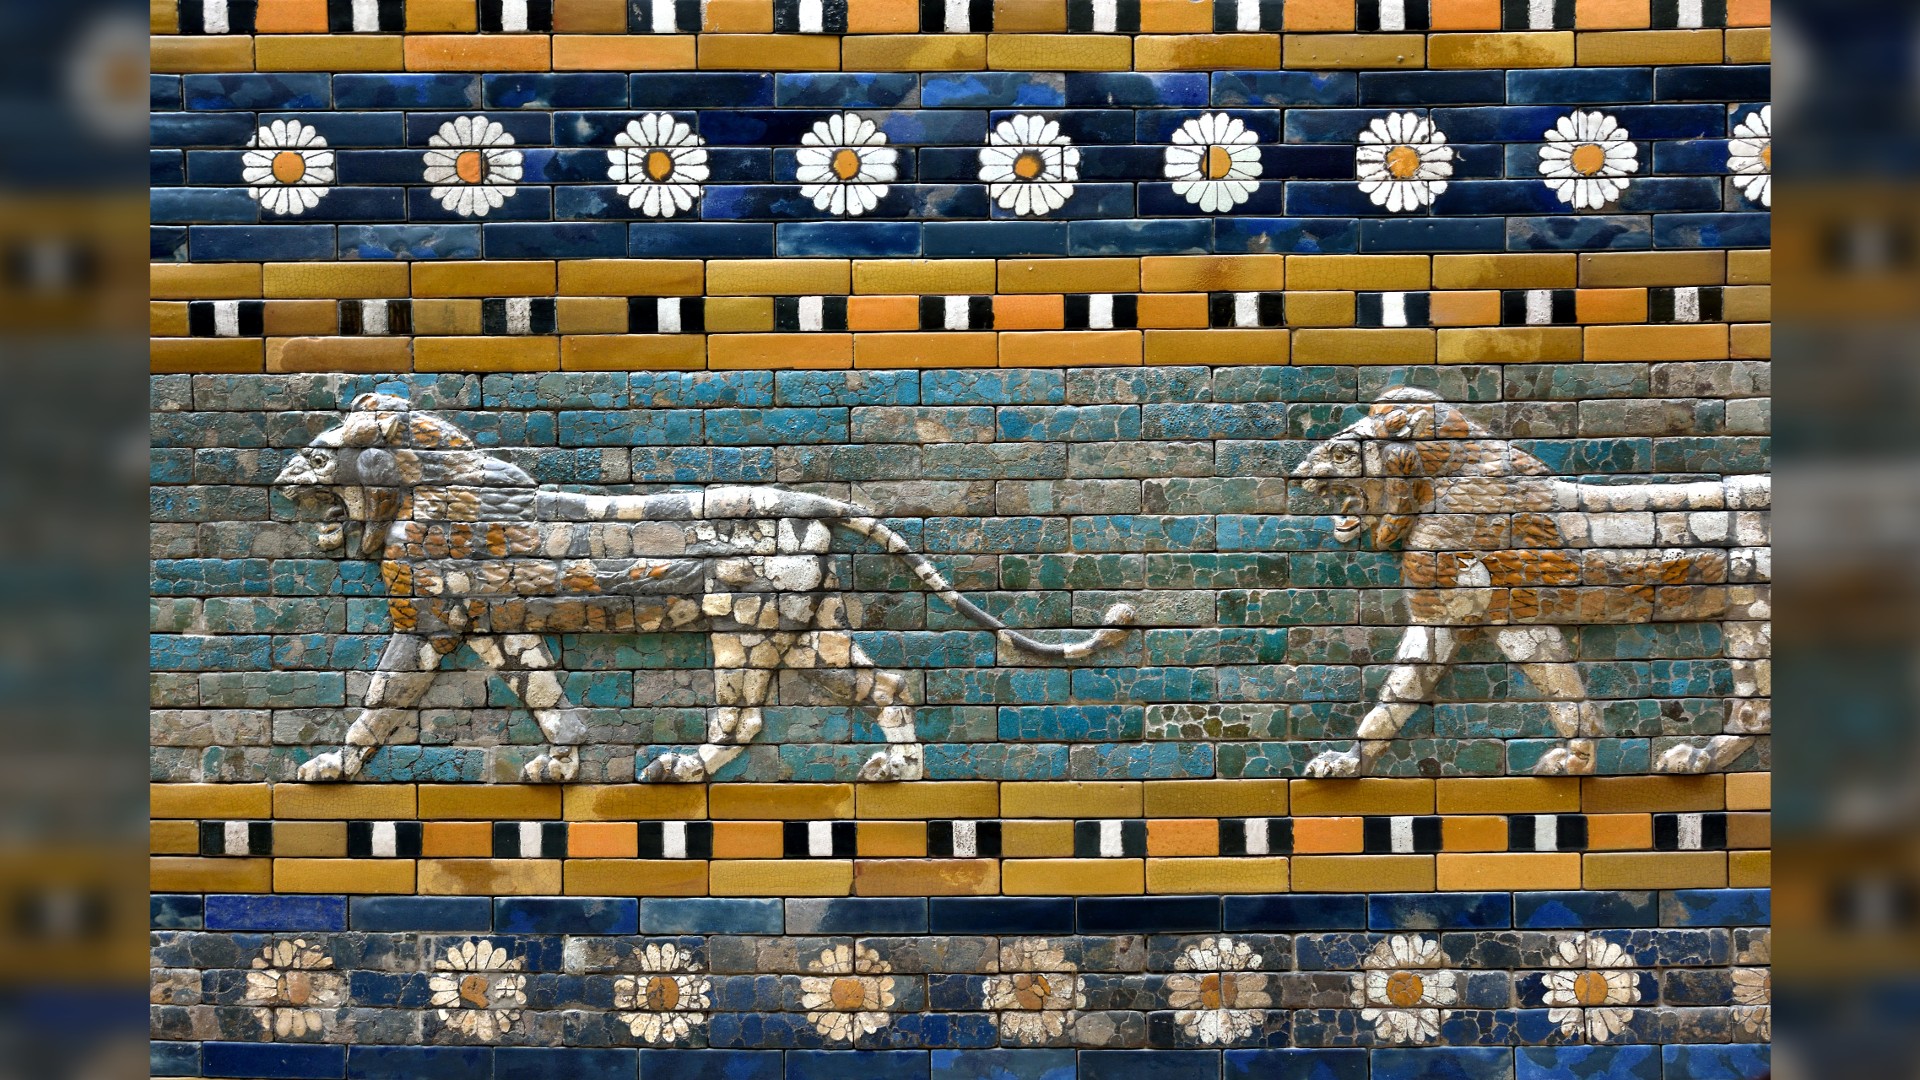 Trappenhuis Regeneratie pianist Ancient Babylon, the iconic Mesopotamian city that survived for 2,000 years  | Live Science